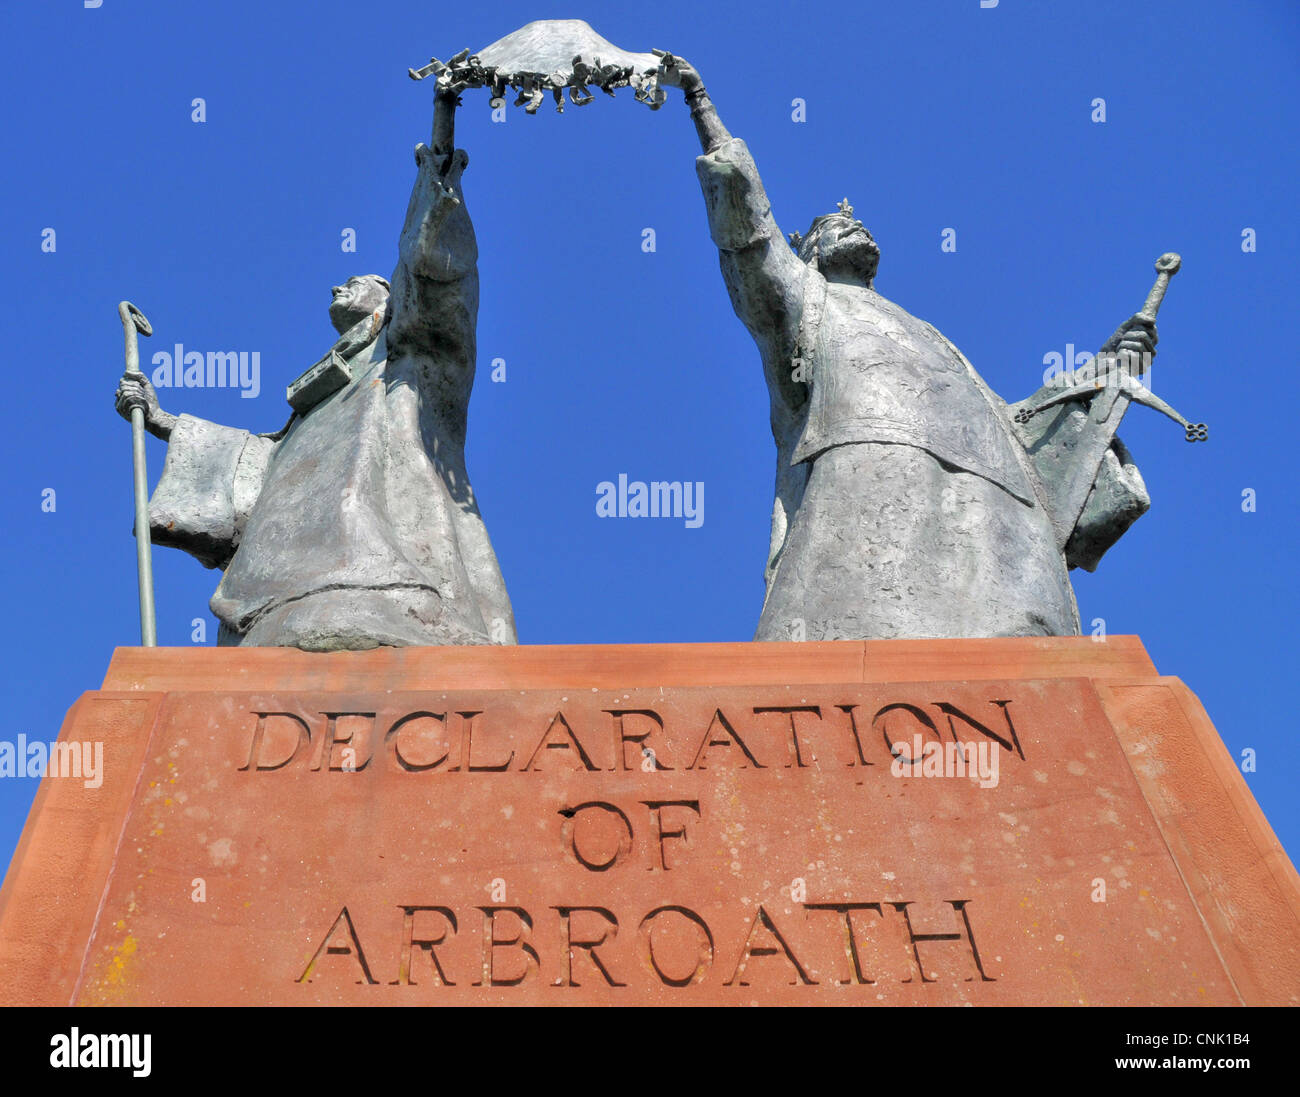 Statue commemorating the historic signing of the Declaration of Arbroath - and thus Scottish Independence - in 1320. Stock Photo